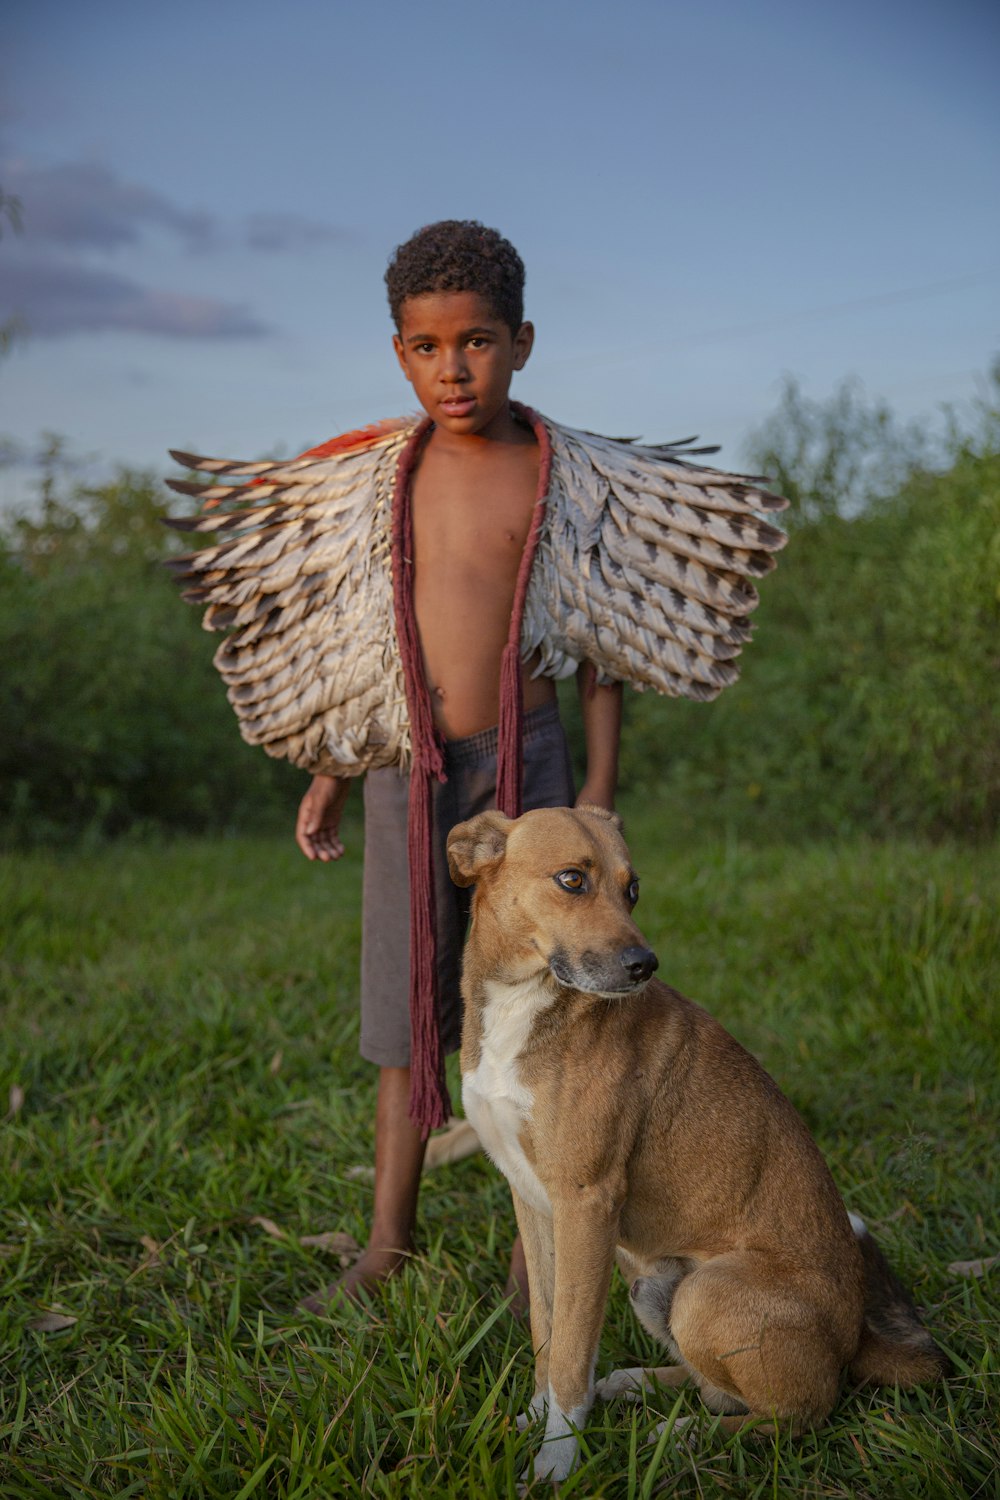 a young boy standing next to a dog in a field